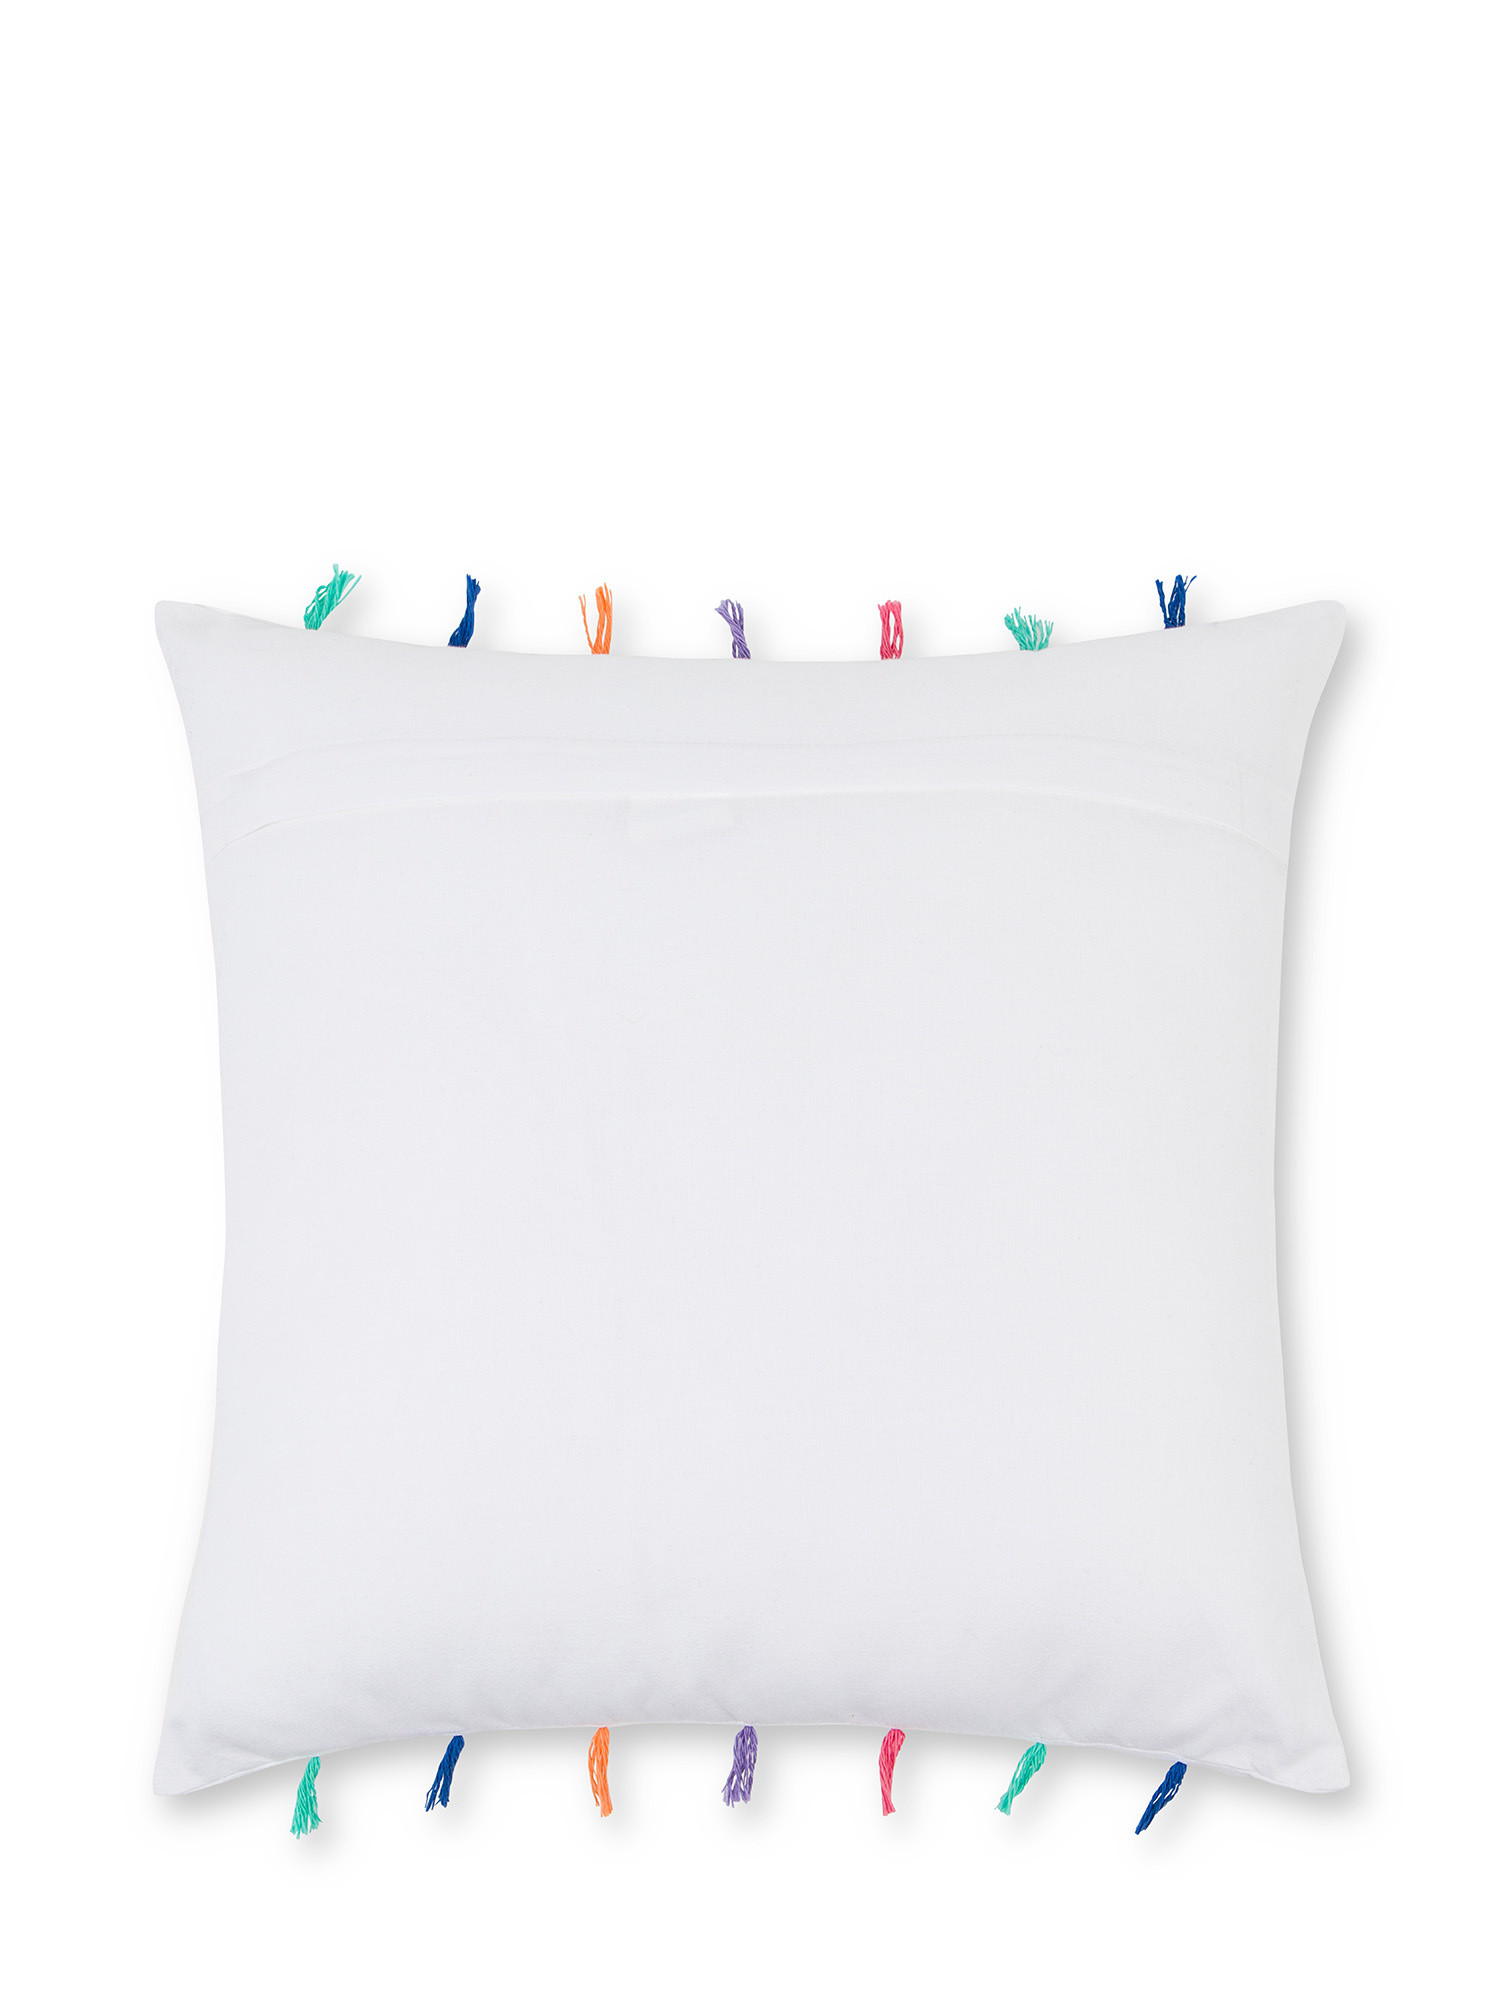 Cotton cushion with chain stitch embroidery and fringes 45x45cm, White, large image number 1